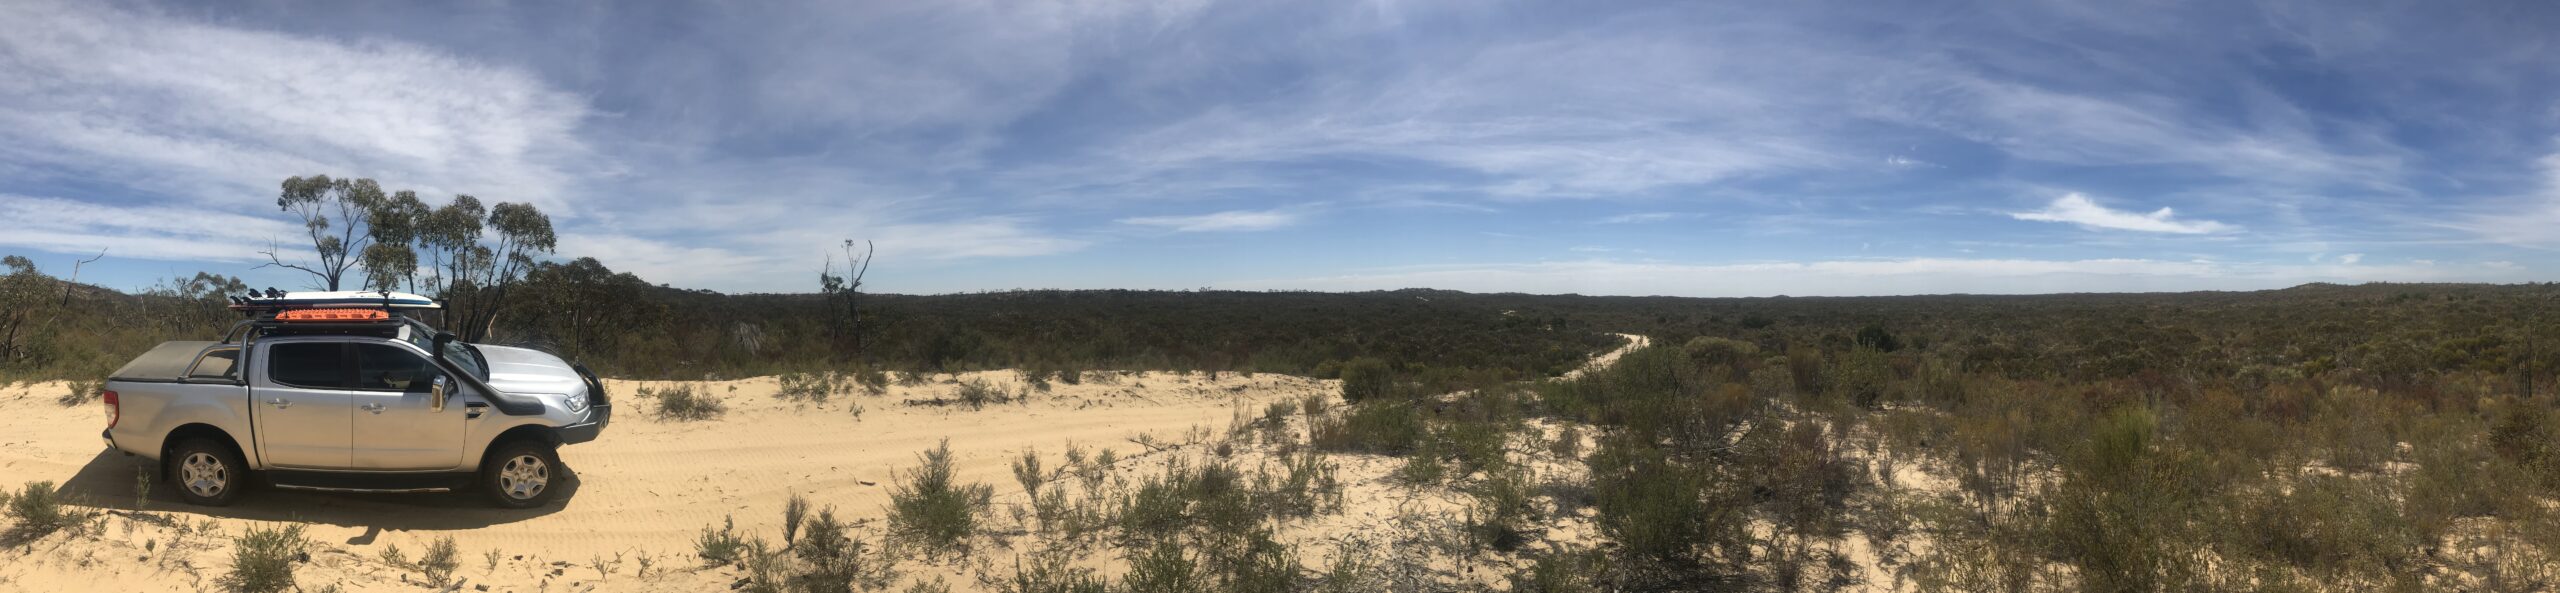 Top of a dune on Cactus Bore Track, Big Desert National Park